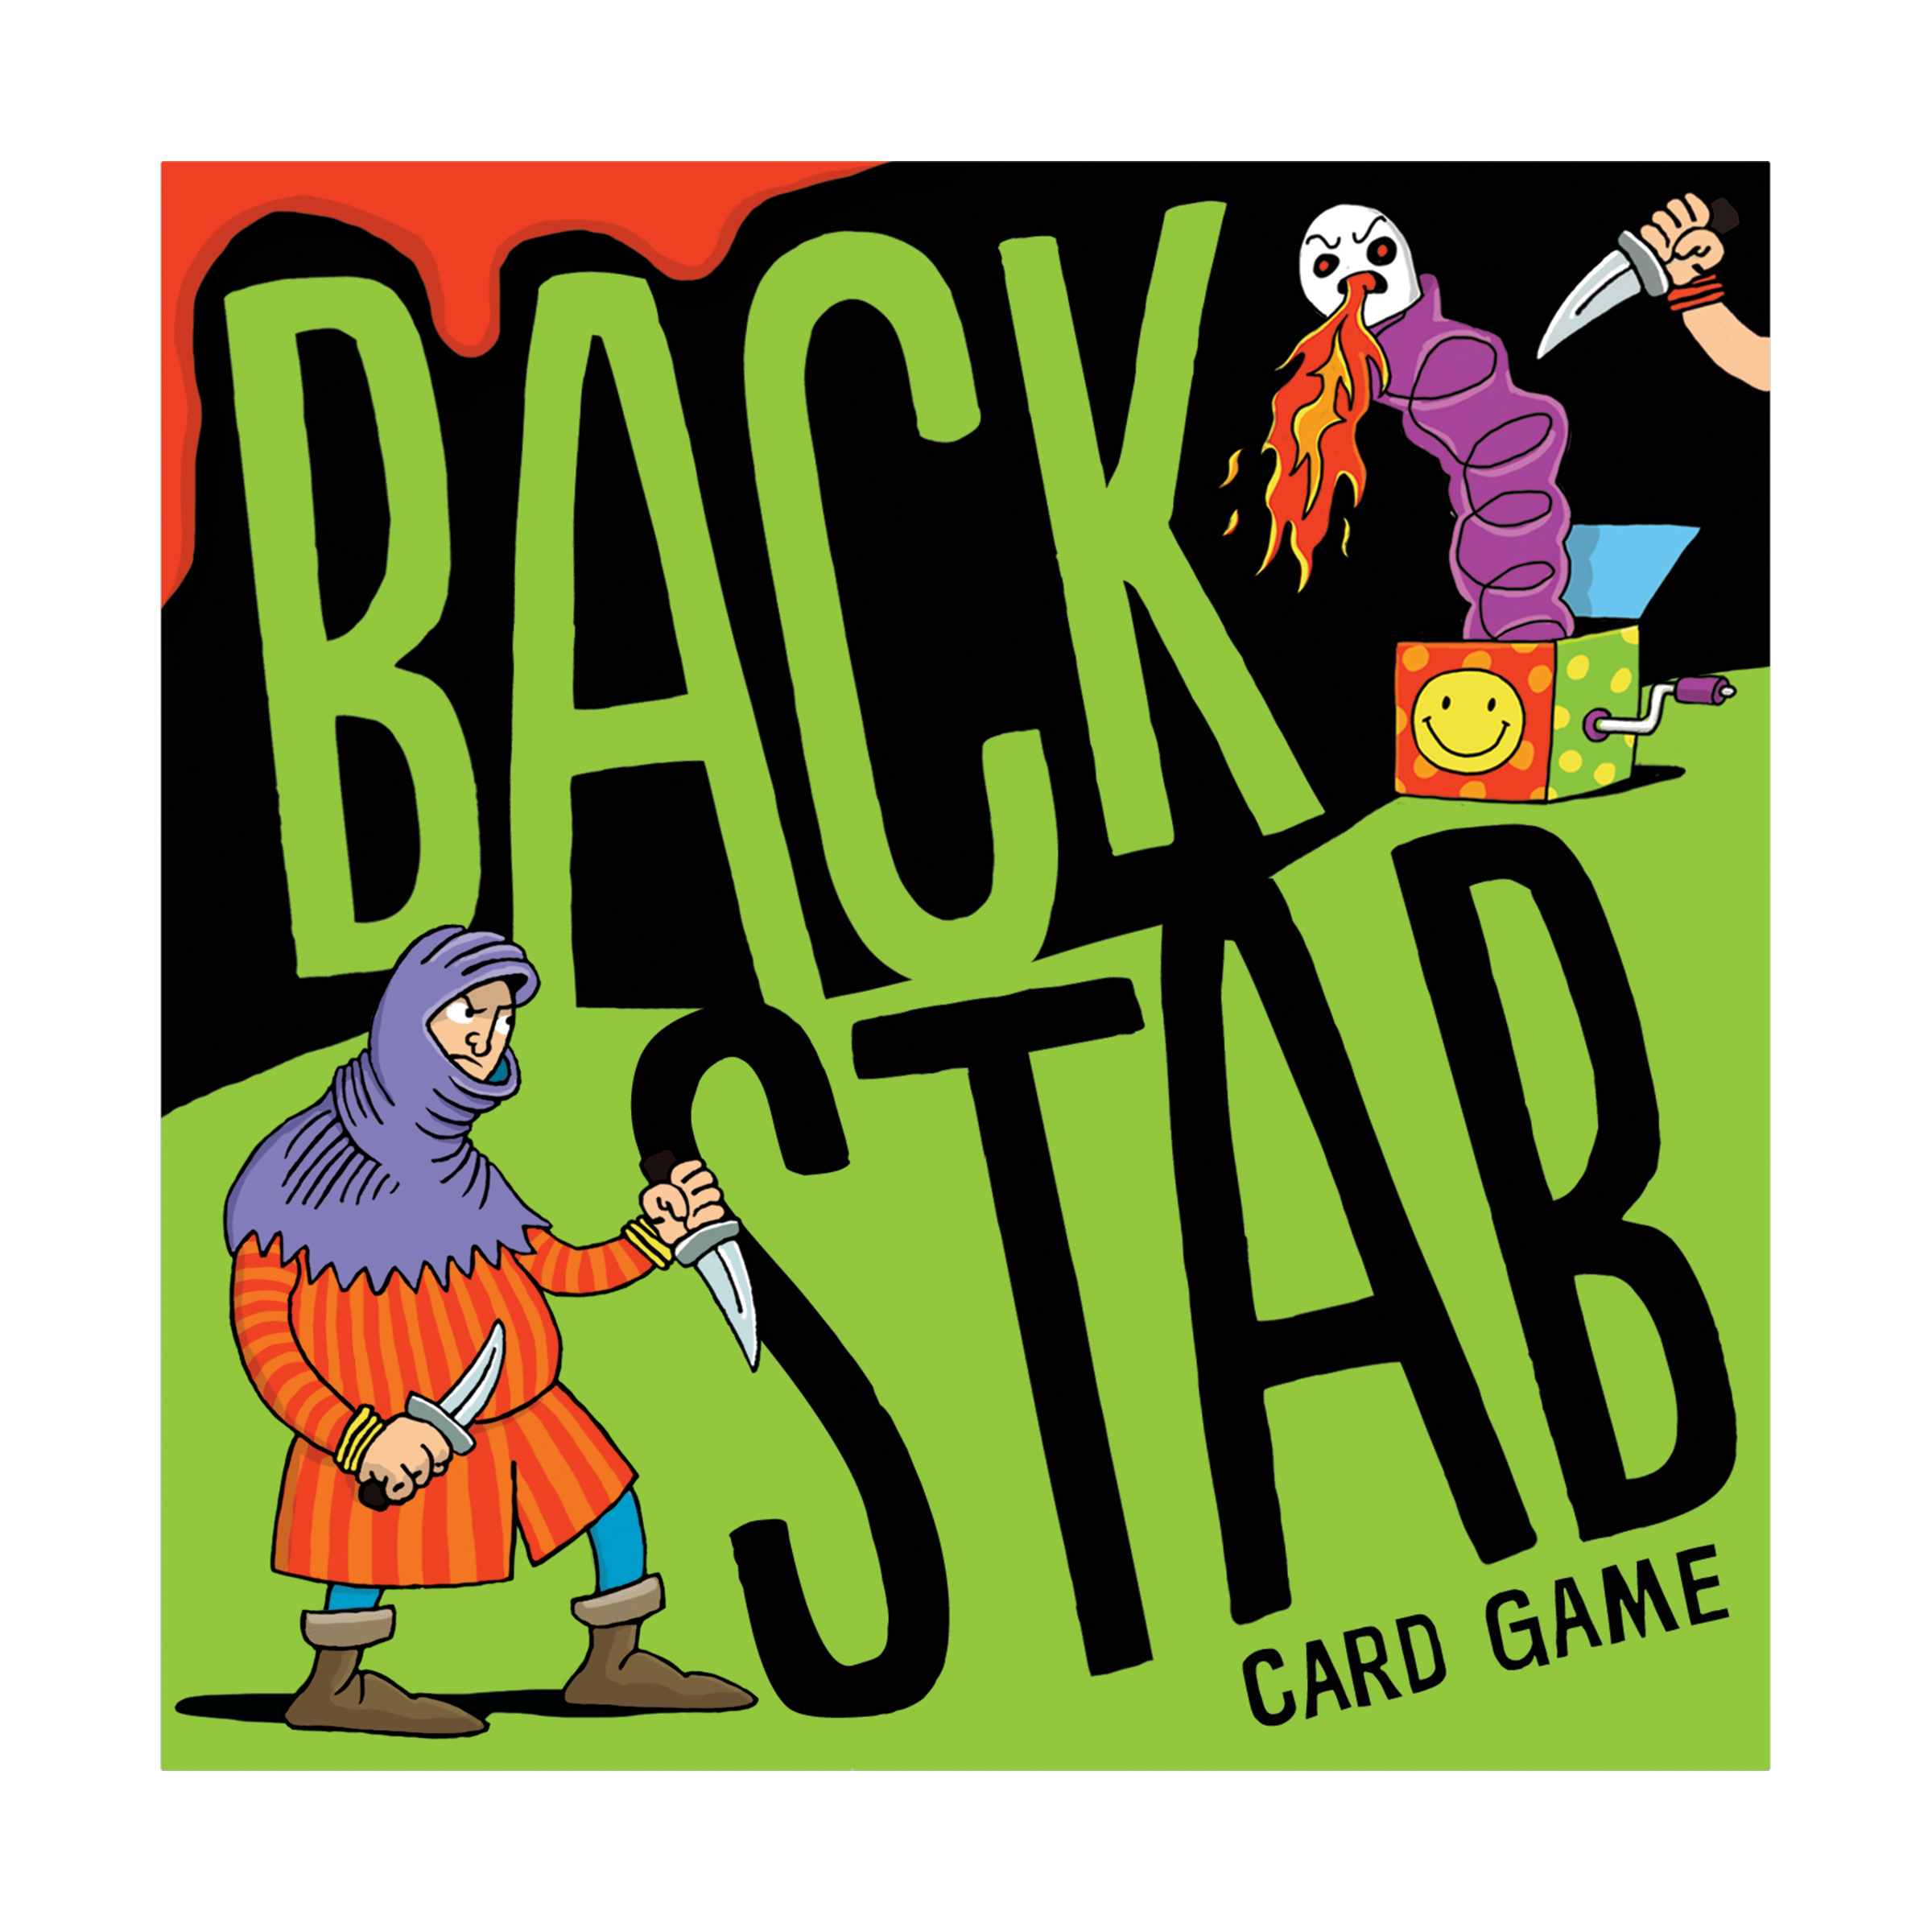 US Games Systems Backstab Card Game